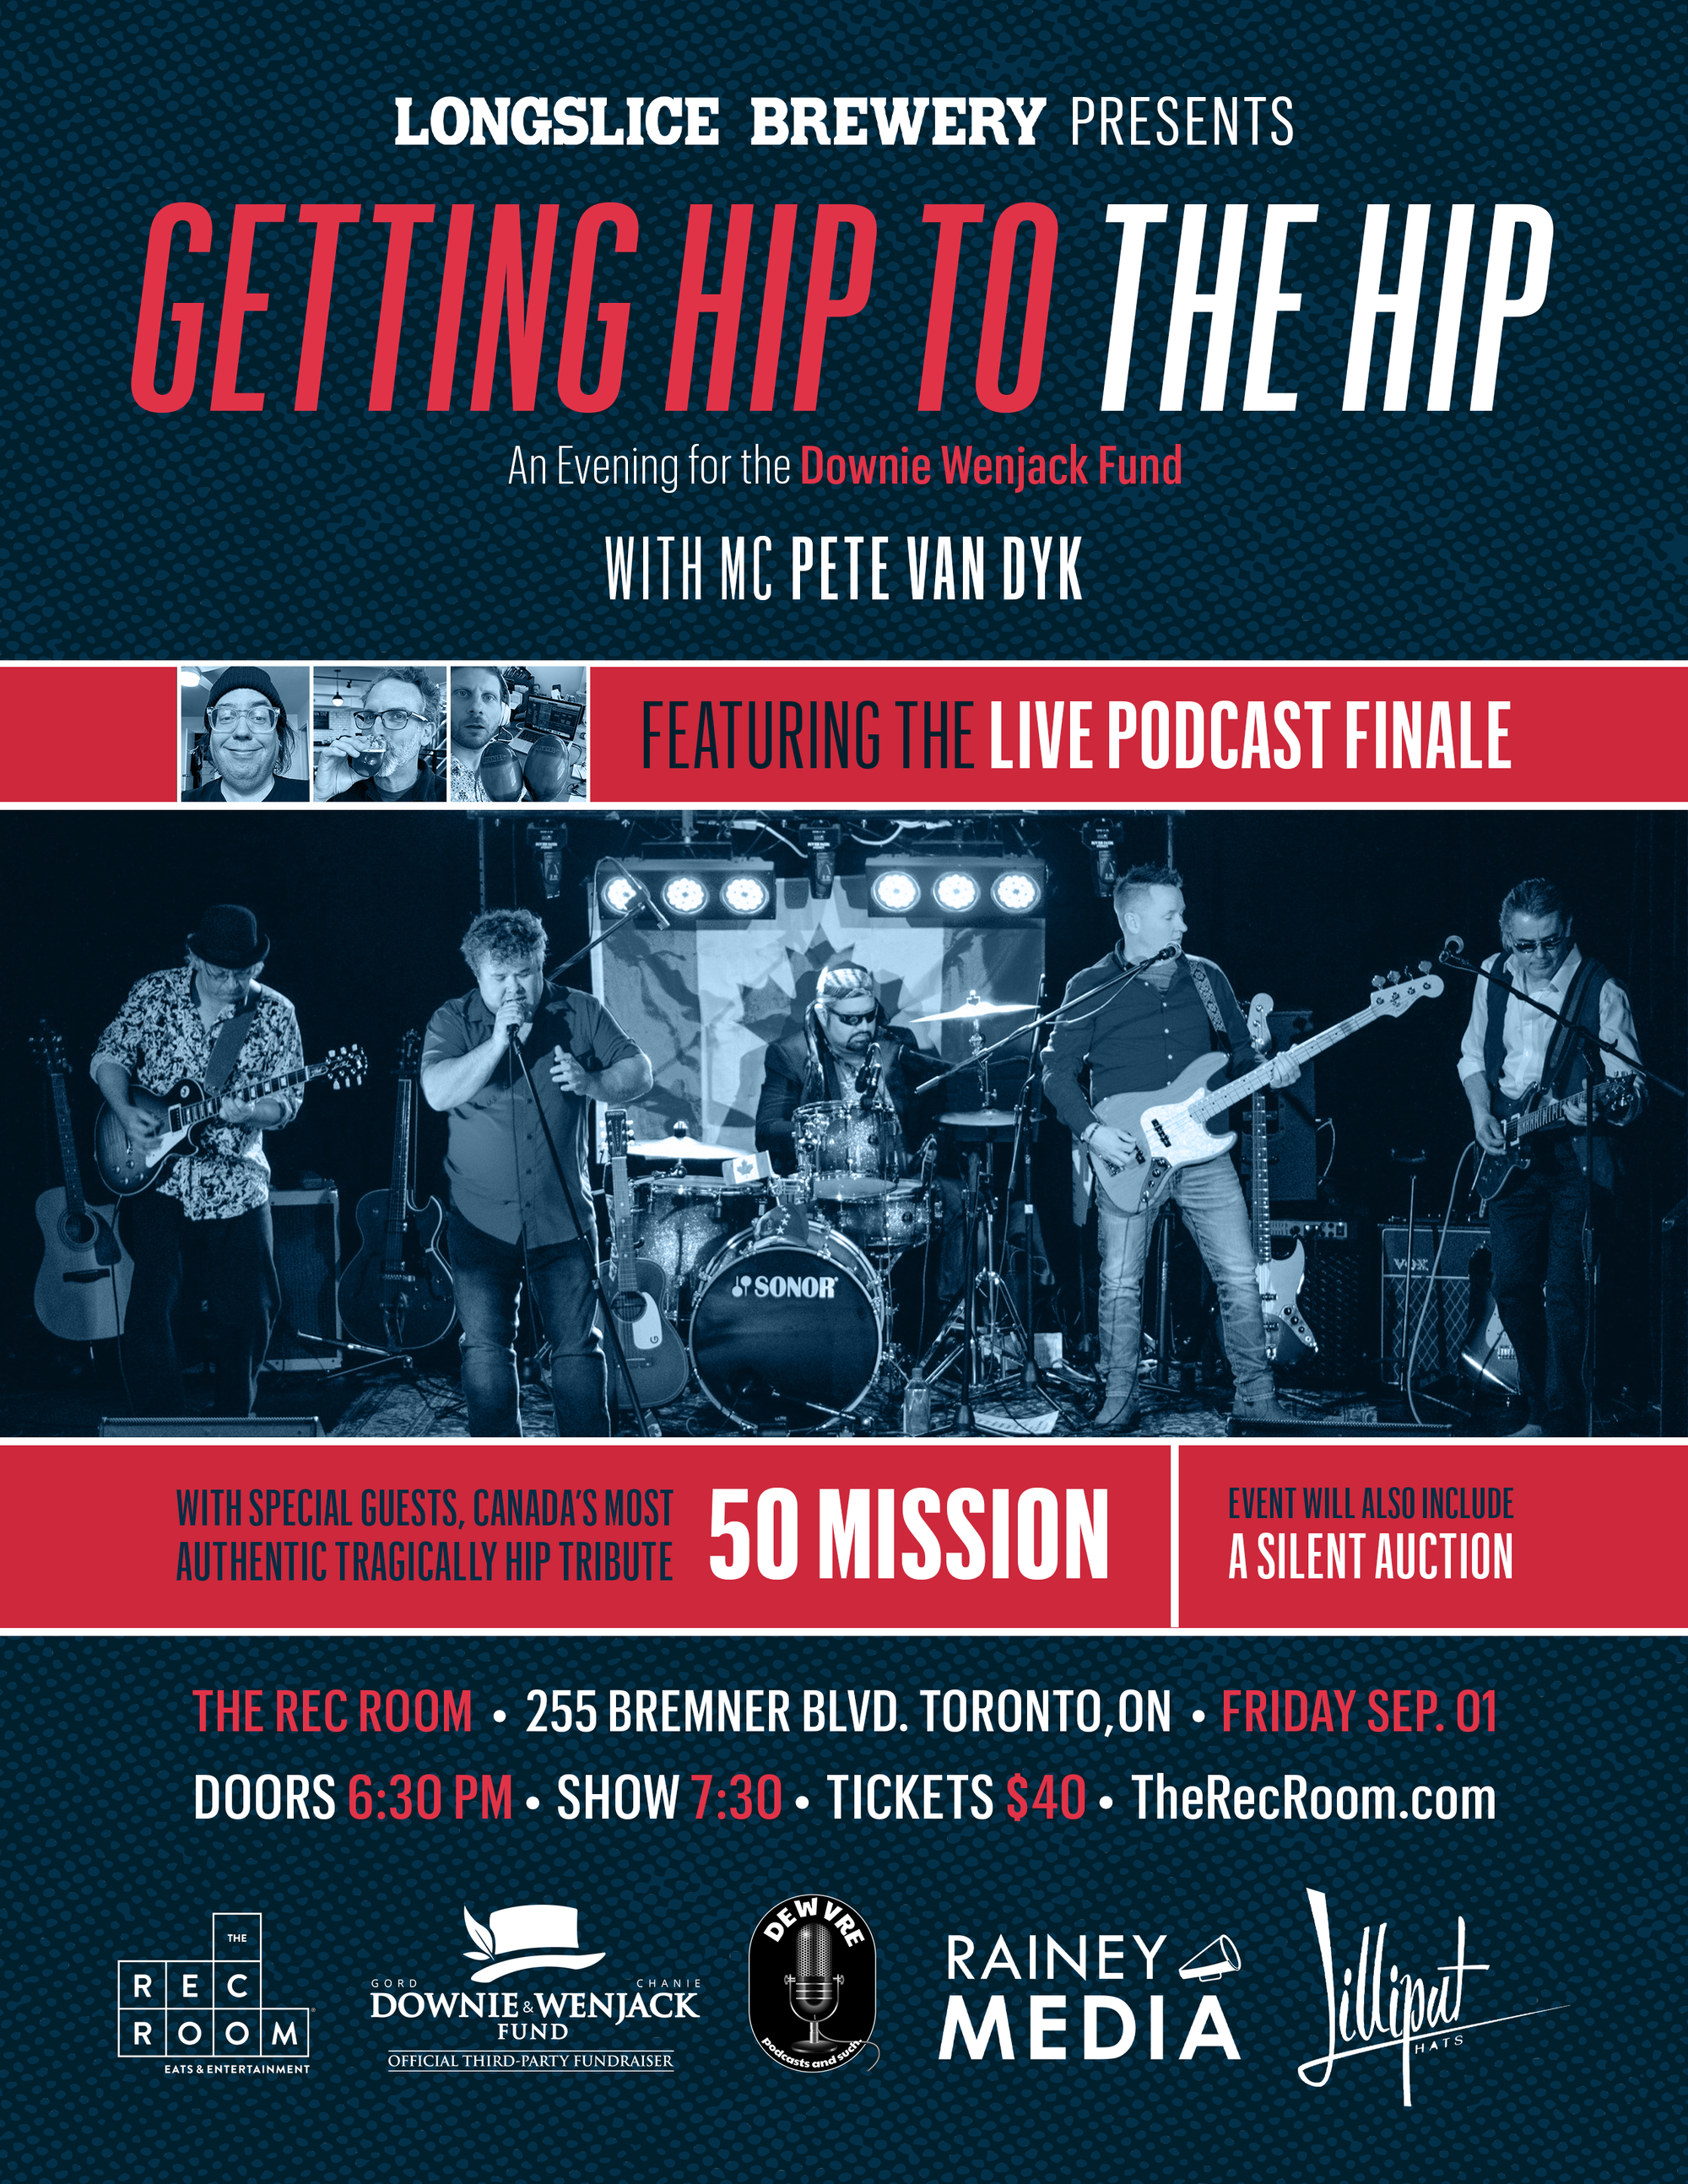 Getting Hip to the Hip -  An Evening for the Downie Wenjack Fund